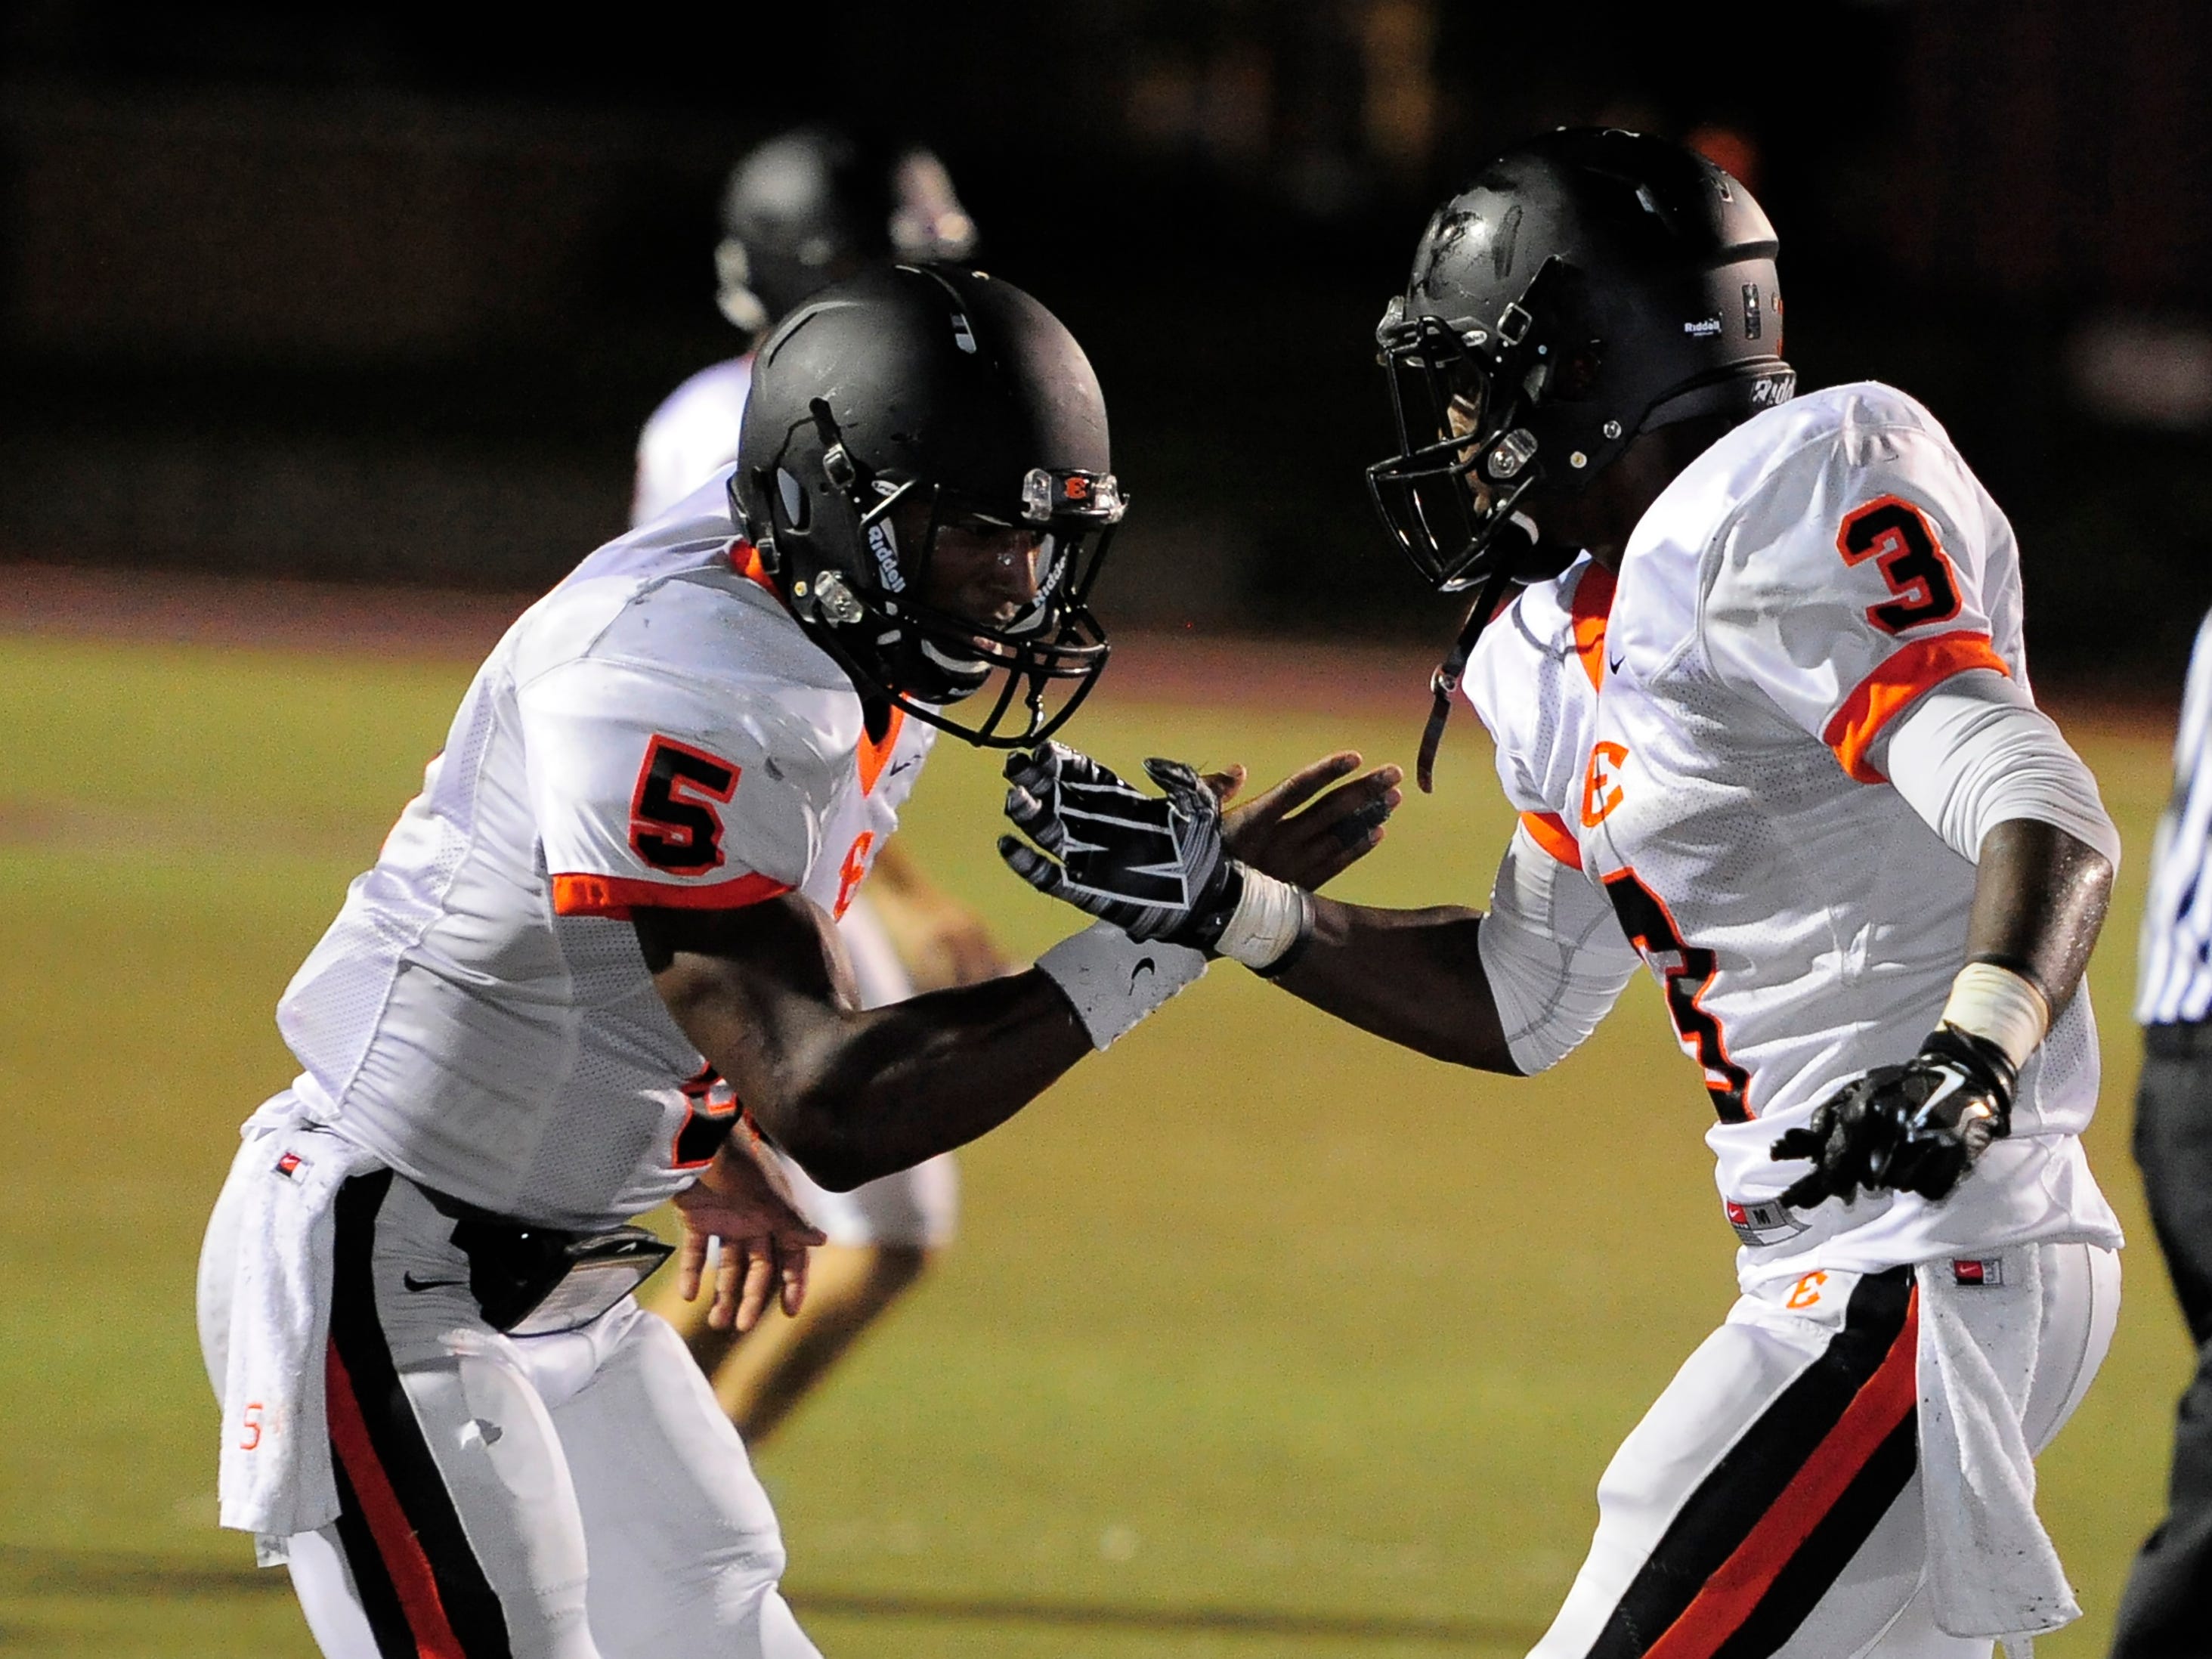 Quarterback P.J. Settles (5) and running back Darius Morehead (3) have helped Ensworth to a 6-1 start to the season.